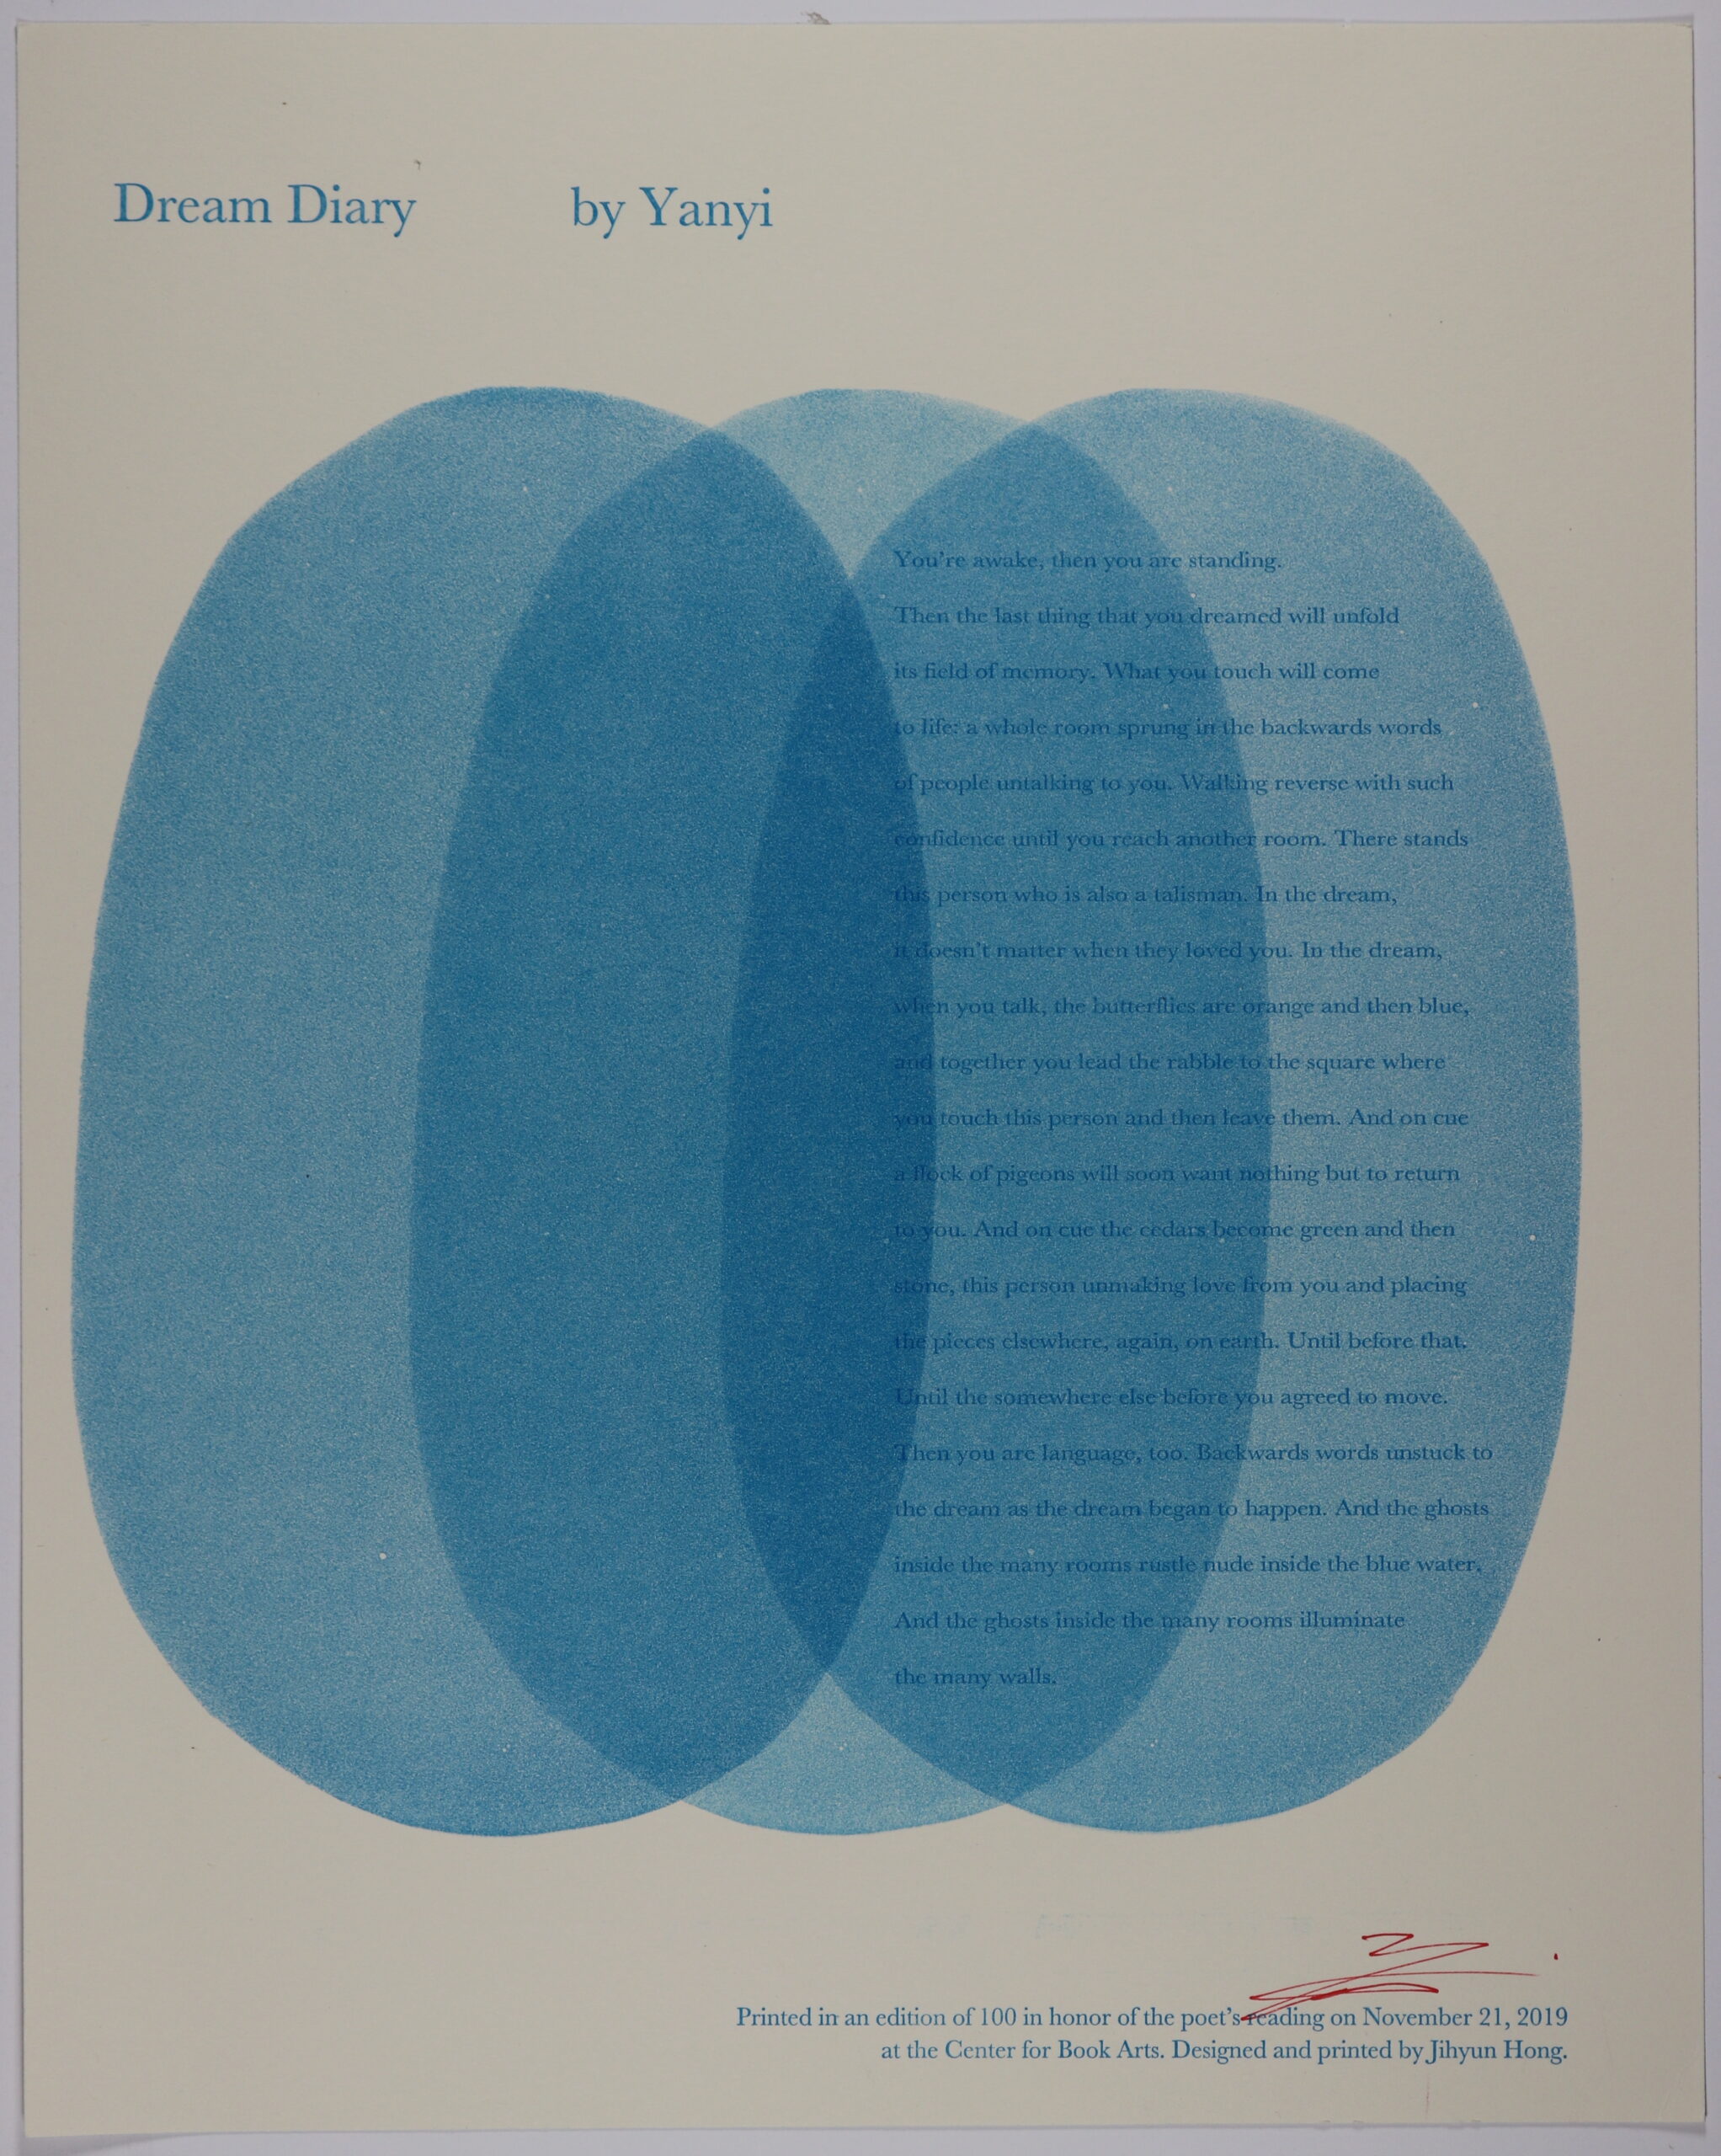 Broadside consists of a cream colored background with three large overlapping shades of blue in the form of ovals in the center of the broadside. Text is in a darker shade of blue, printed to the right side of the paper in one of the blue ovals. Title is towards the above left in a lighter shade of blue.